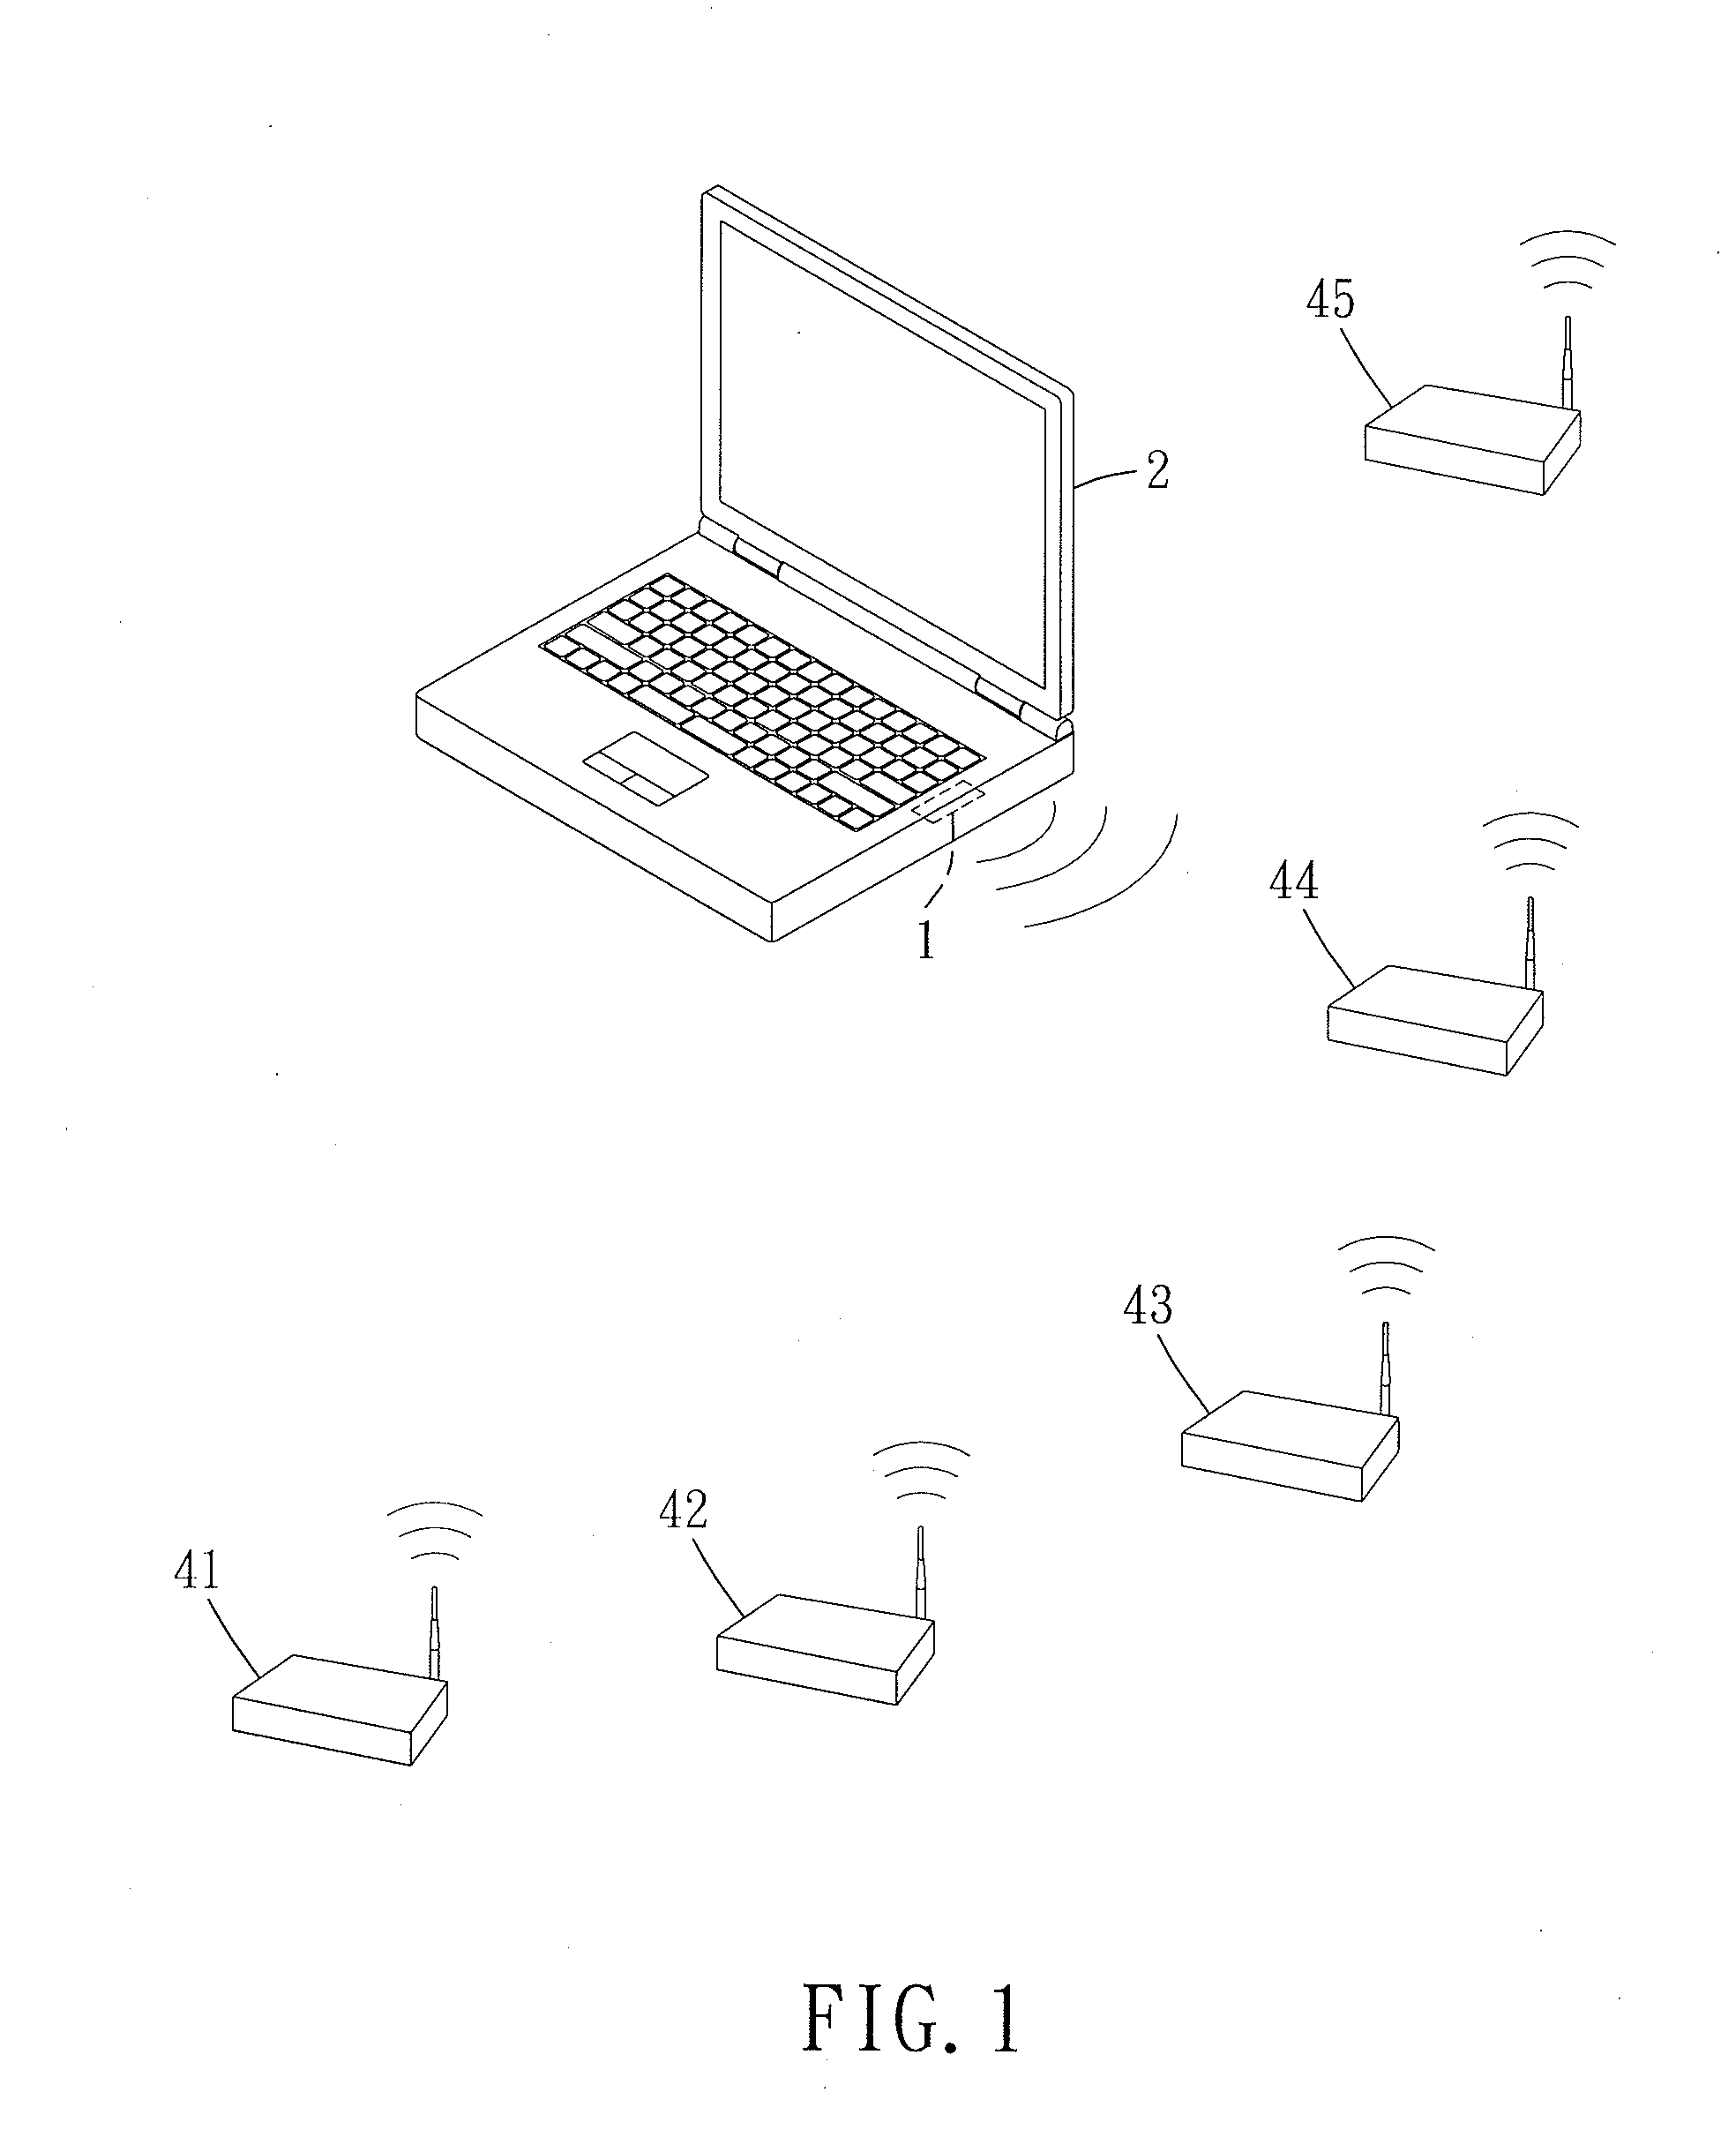 Method for increasing wireless networking speed, and a wireless network apparatus